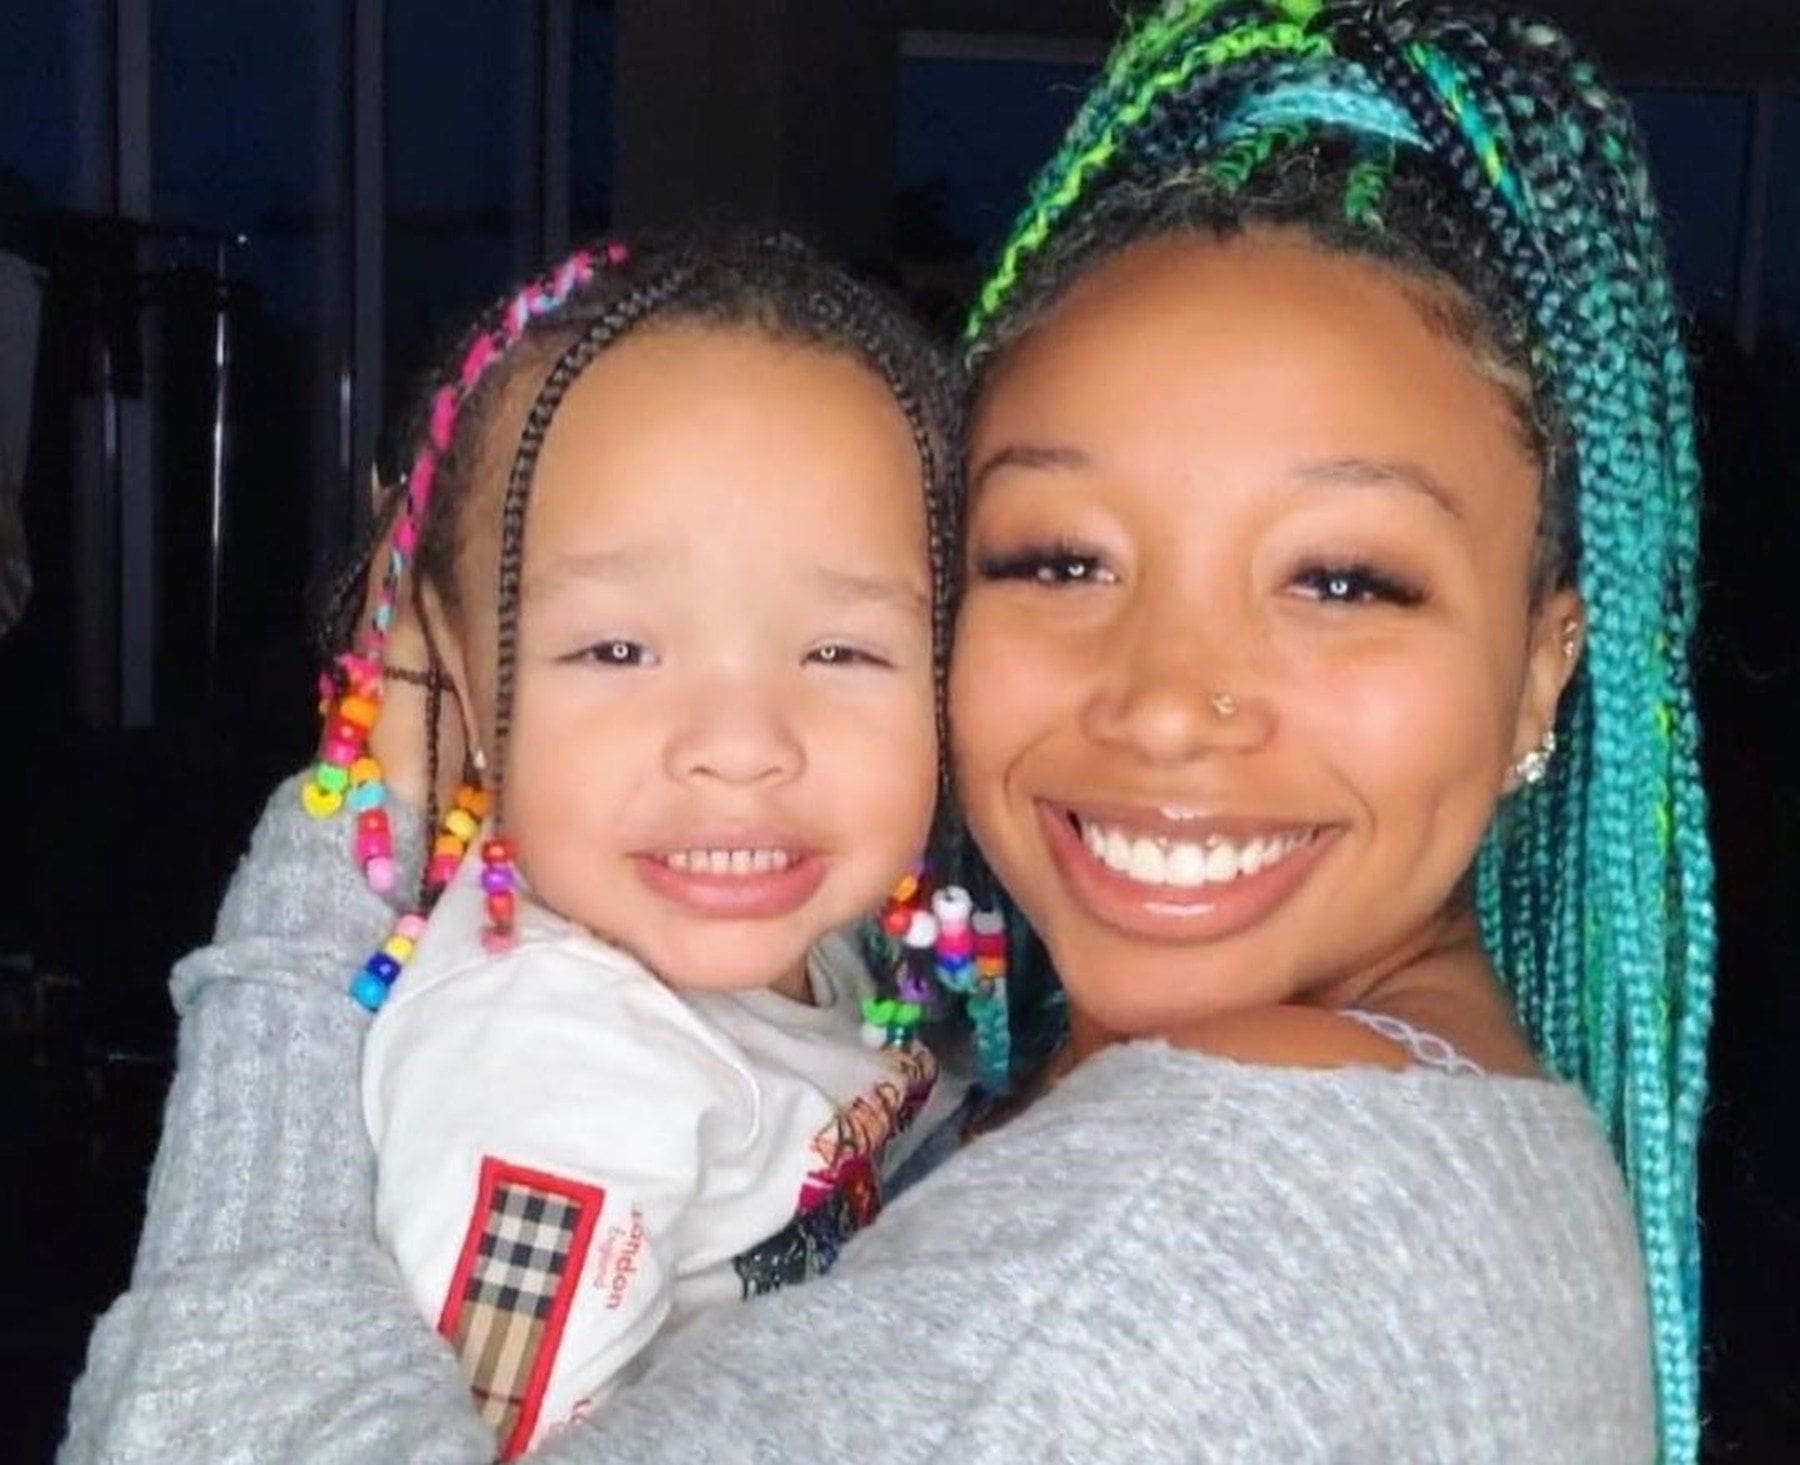 Tiny Harris' Daughter, Zonnique Pullins Graces The Cover Of A Prestigious Magazine And Her Mom Could Not Be Prouder